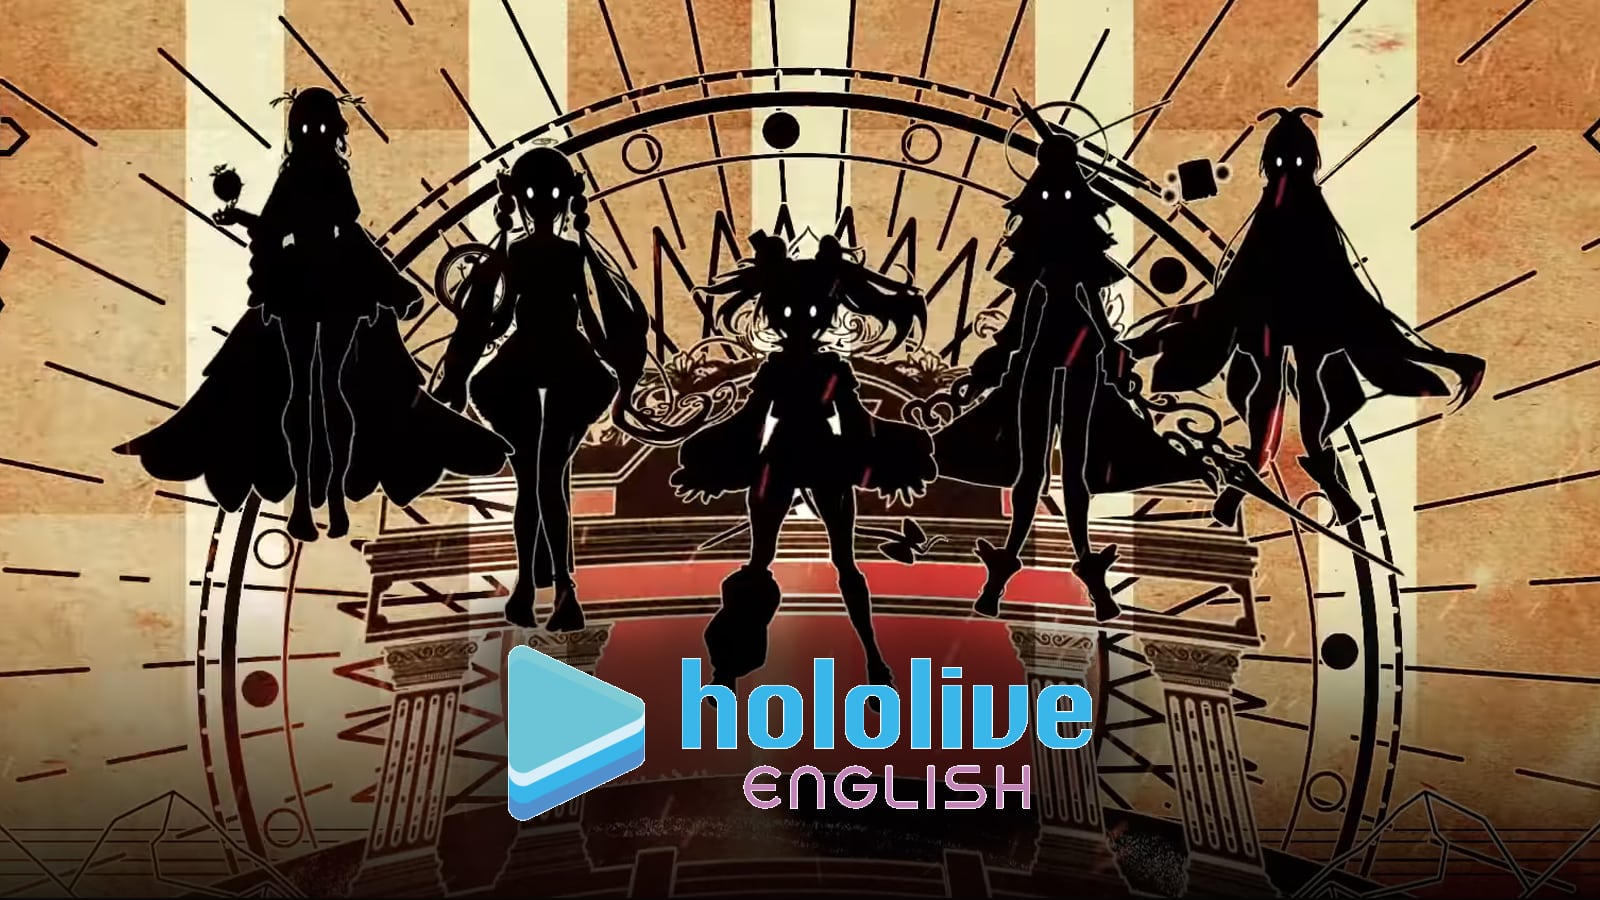 Hololive Council revealed: Five new English VTubers debuting soon